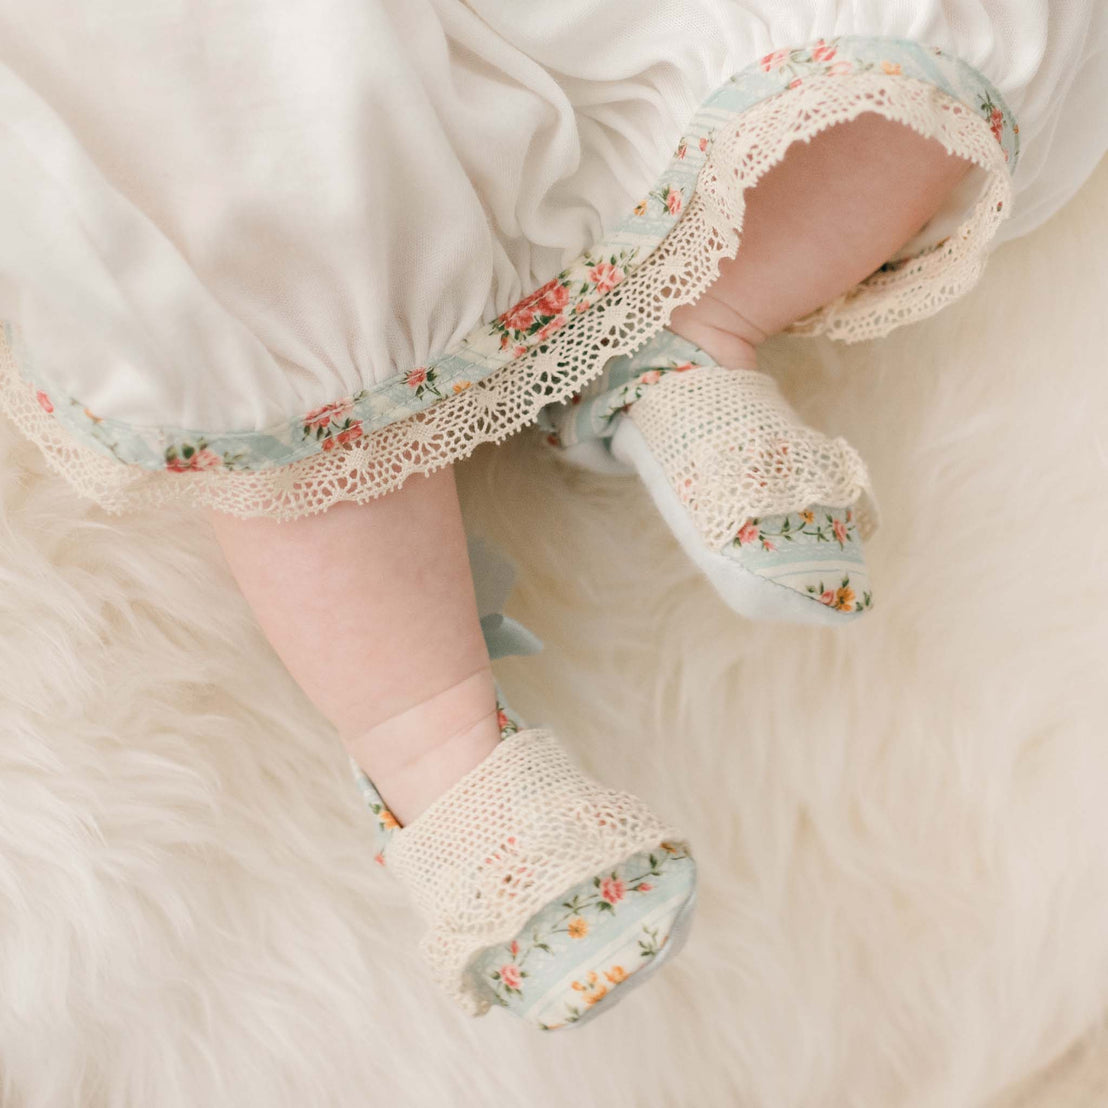 Detail of the "Powder Blue" variant of the Eloise Layette Gown skirt and Eloise Booties. The booties match the Eloise floral striped material with the natural color lace across both the skirt and toe.